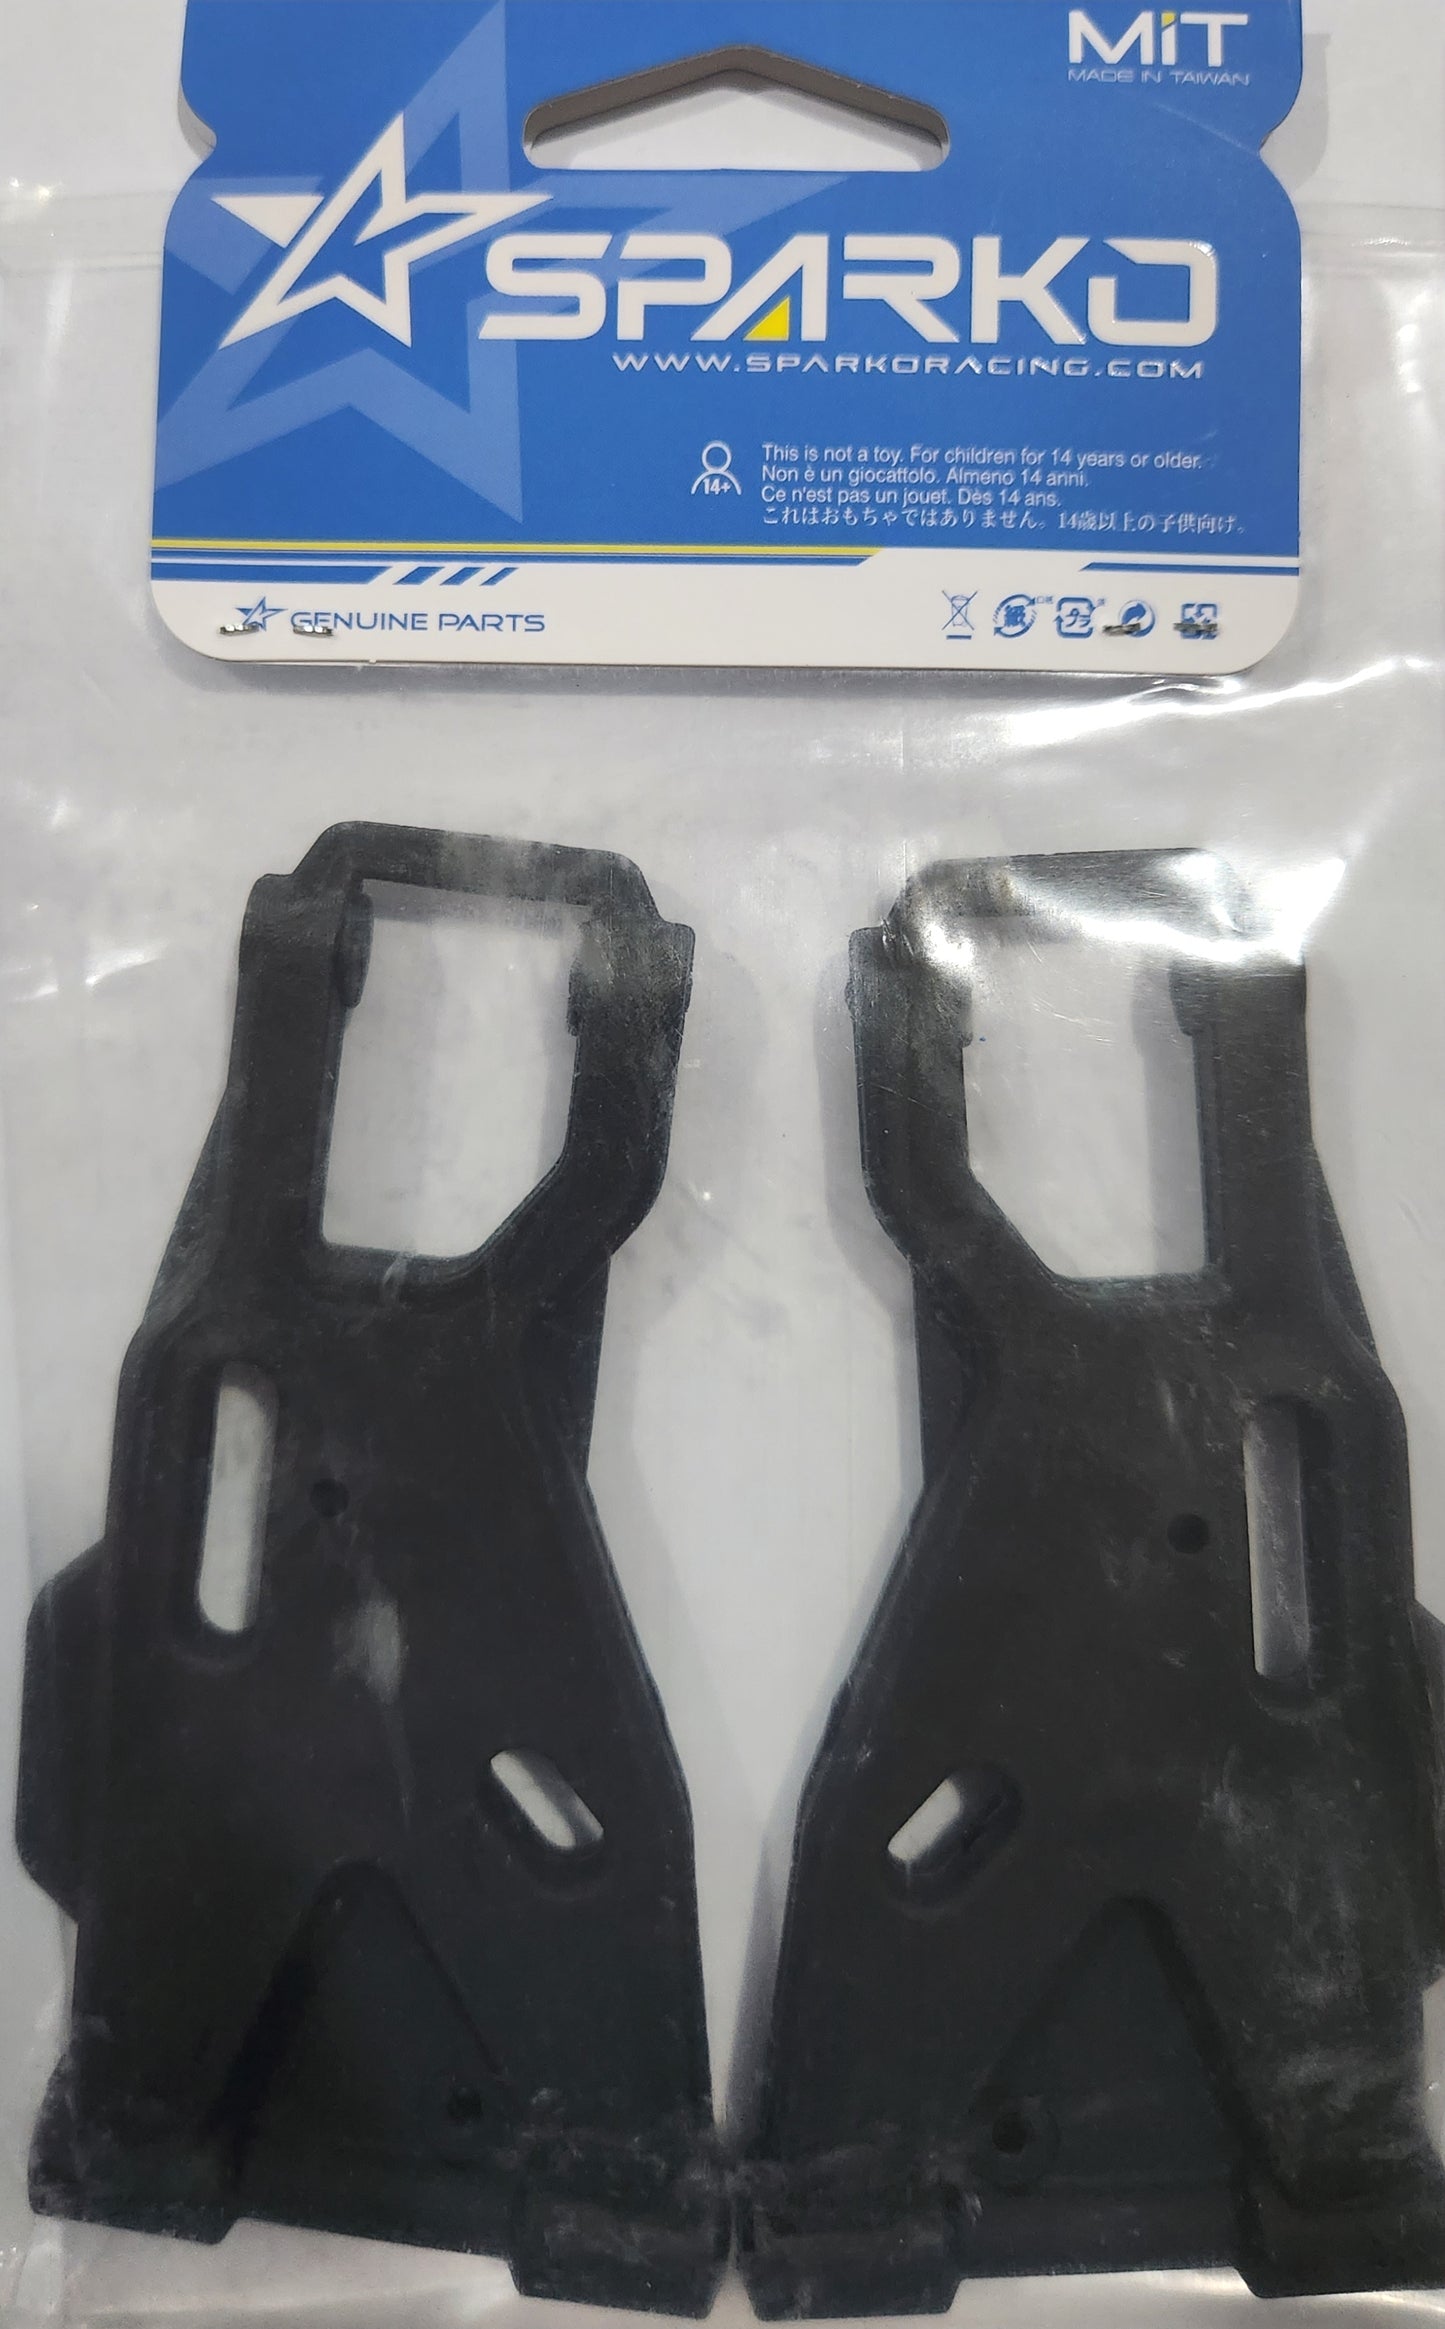 Sparko Racing Front Lower Suspension Arms (Left & Right) (Soft High Tough)